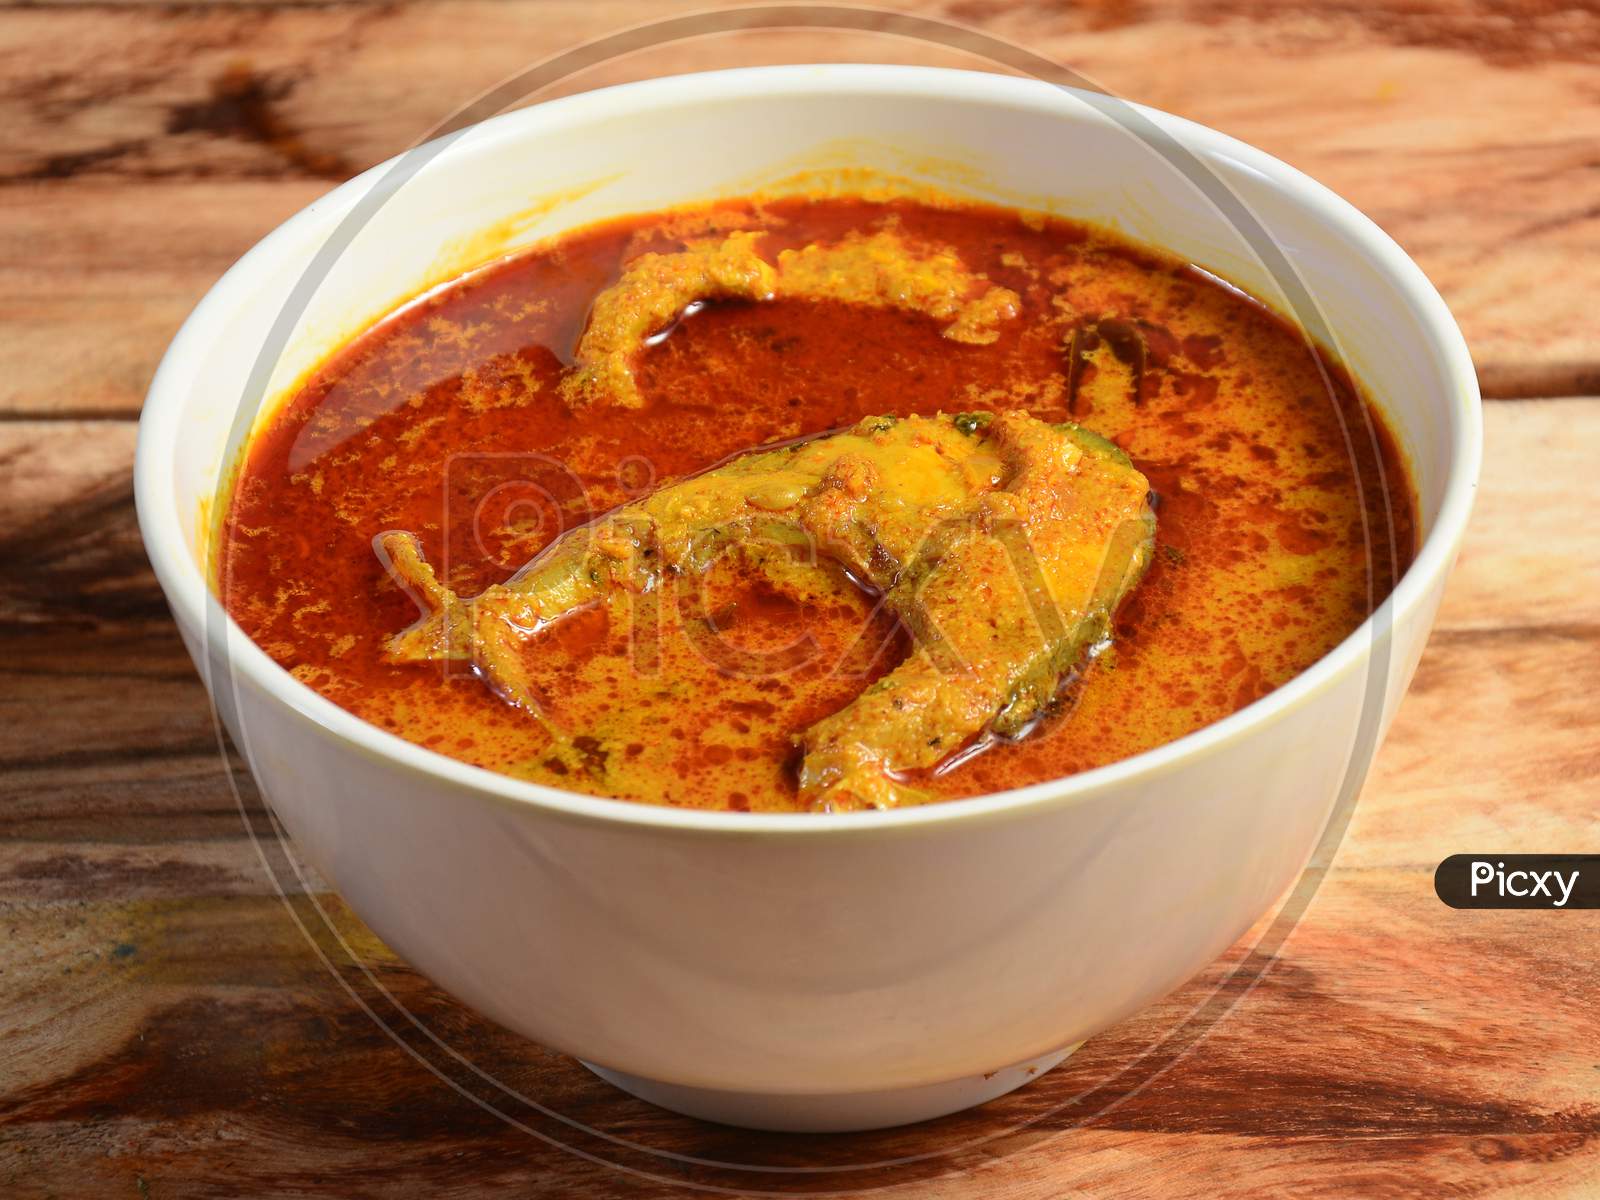 Spicy And Hot King Fish Curry, Kerala India. Barracuda Fish Curry With Green Chili, Coconut Milk And Mango Asian Cuisine.. Served Over A Rustic Wooden Background,Selective Focus